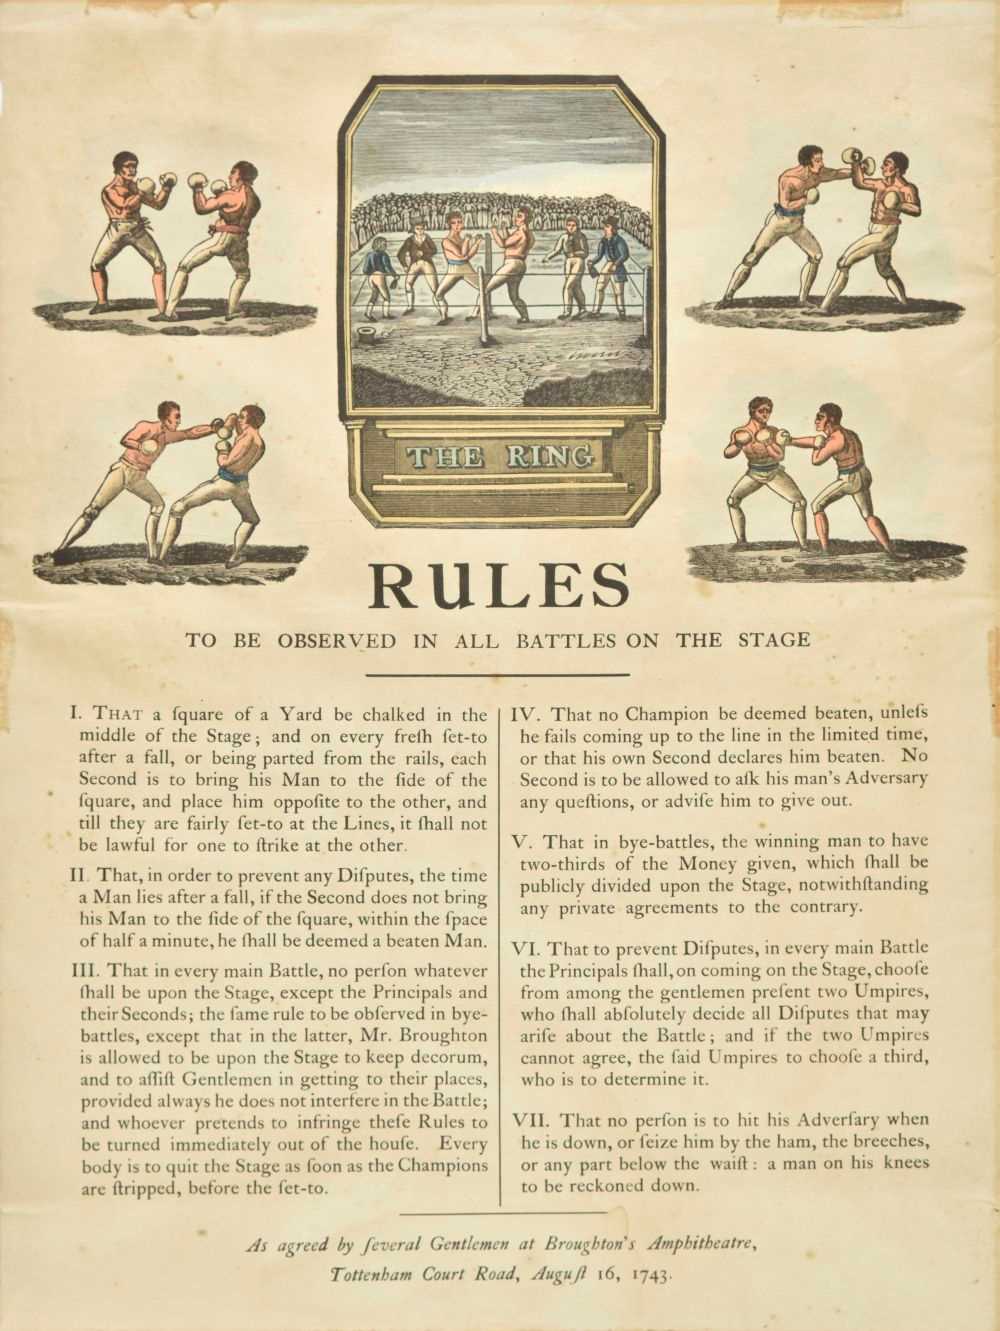 Lot 93 - Boxing. Broadside of rules, dated 1743 but later